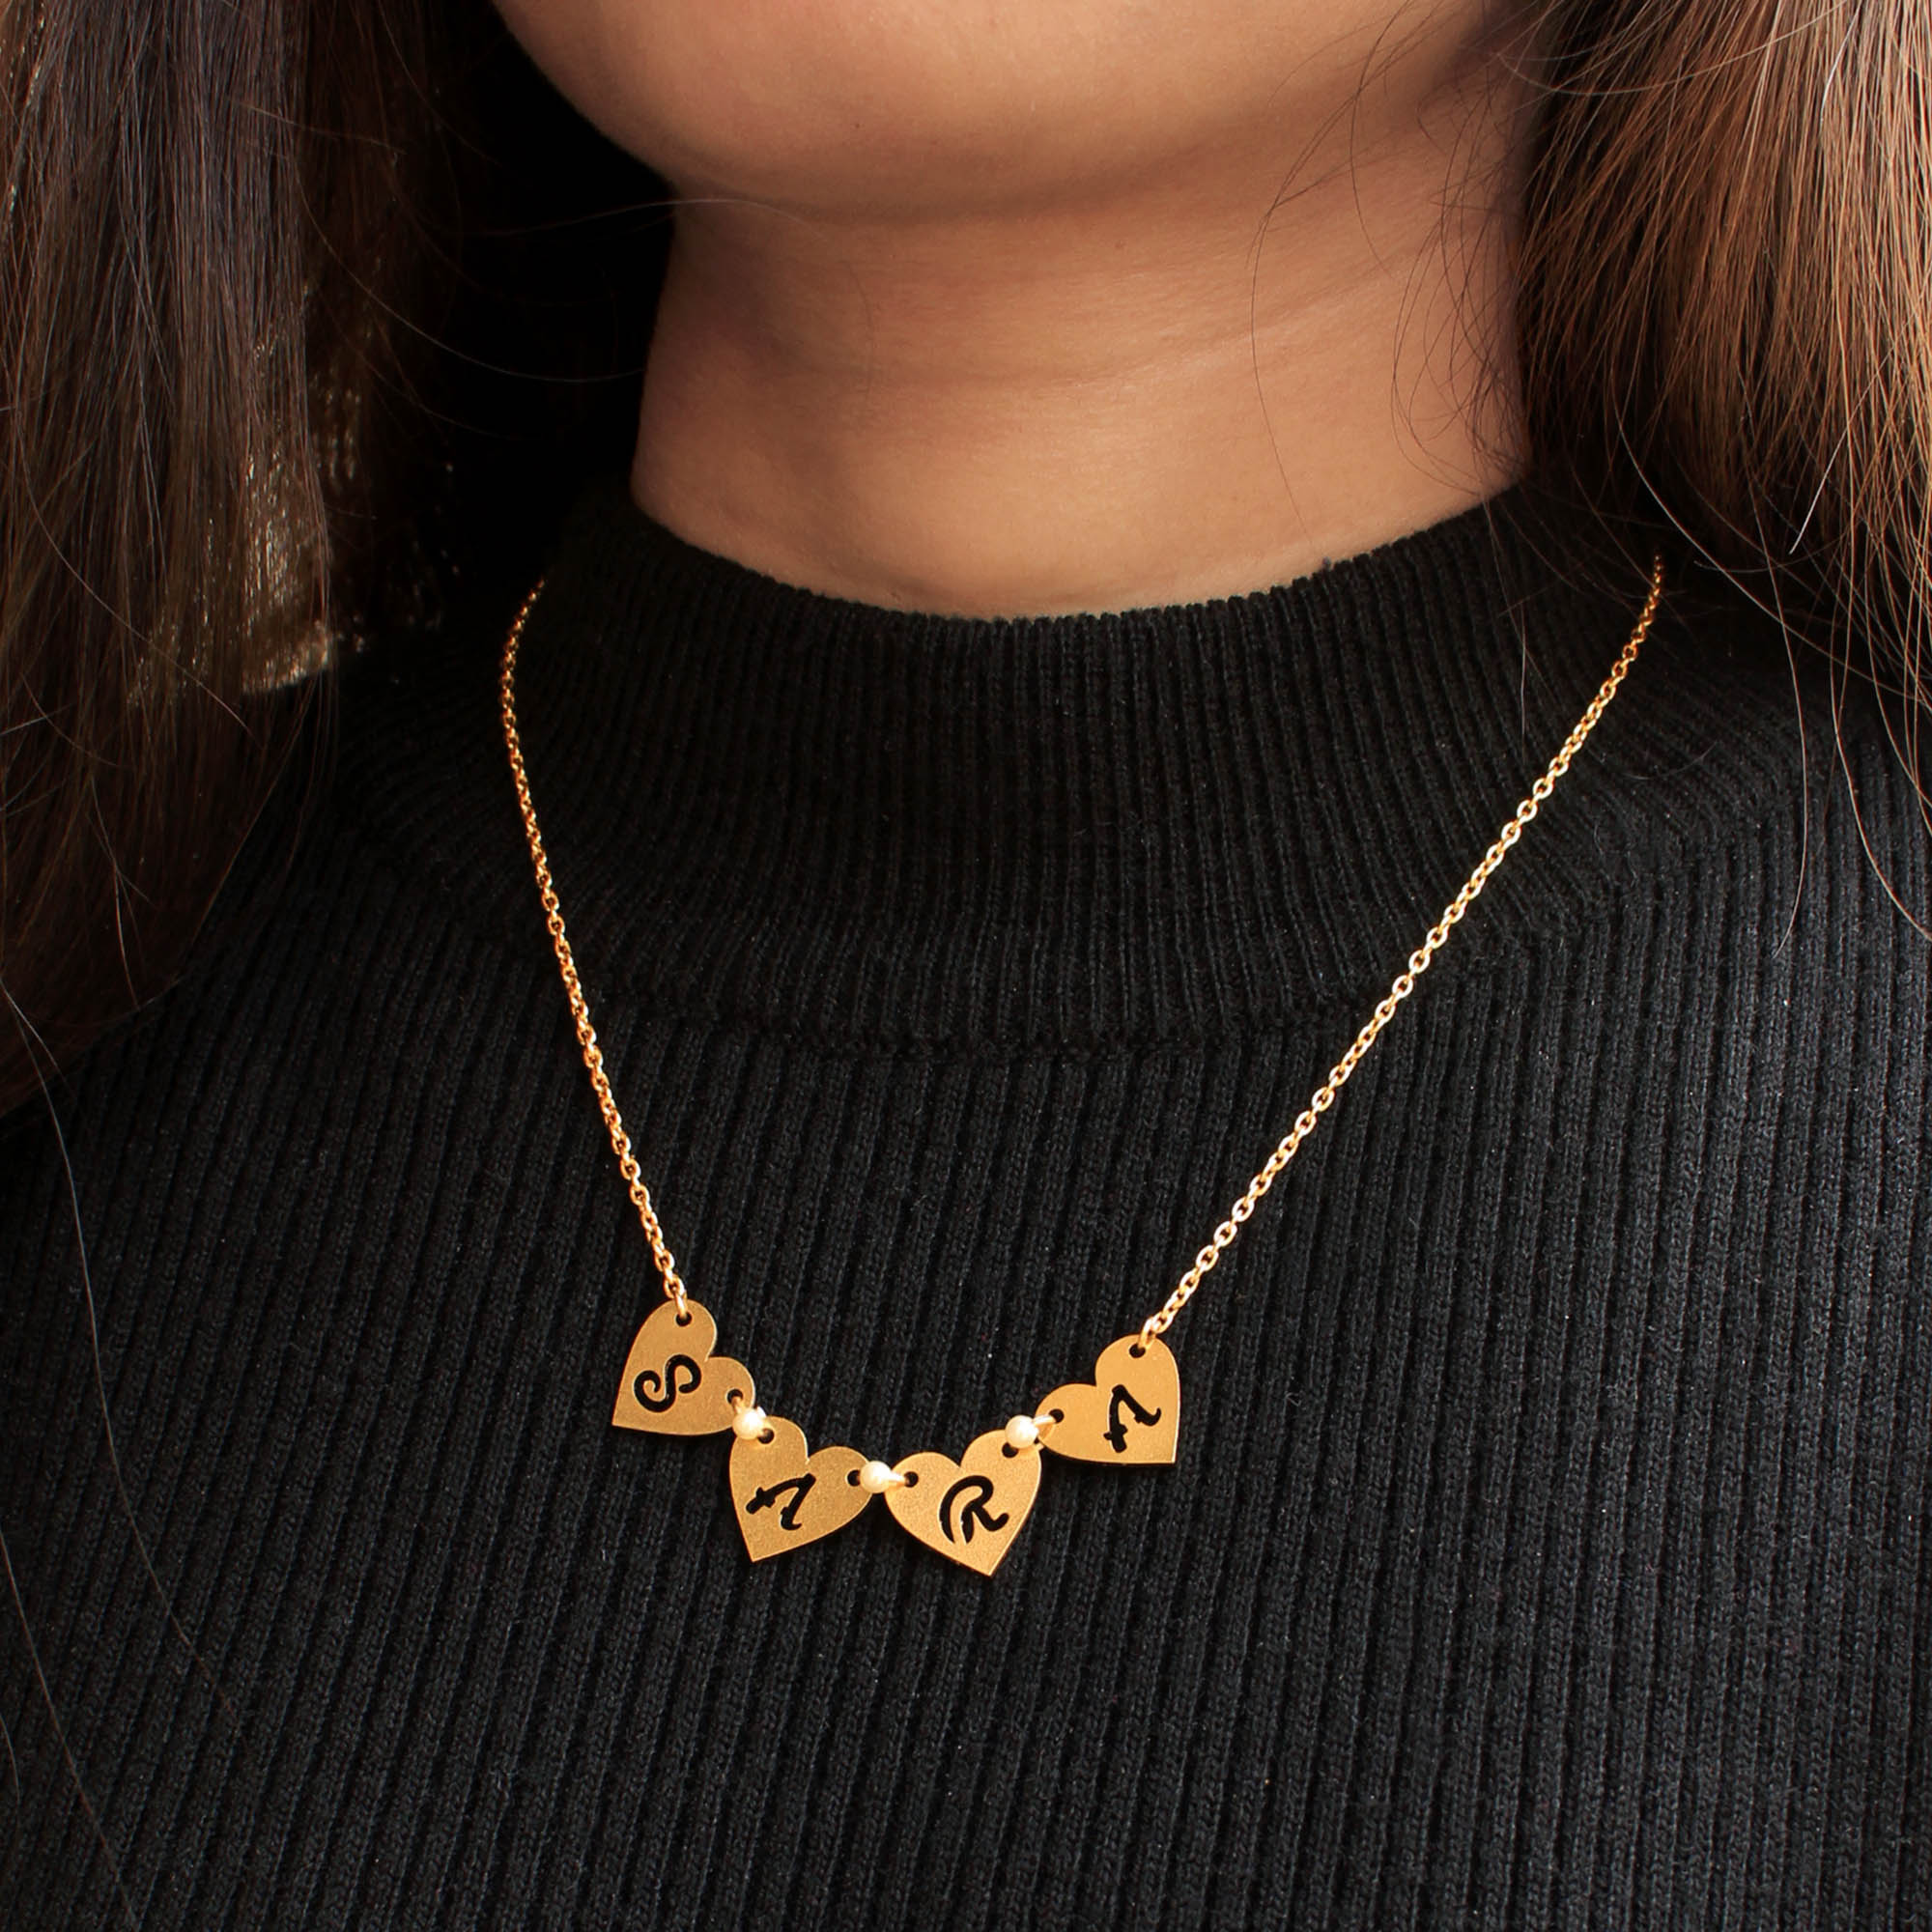 Connected Gold Hearts Name Necklace